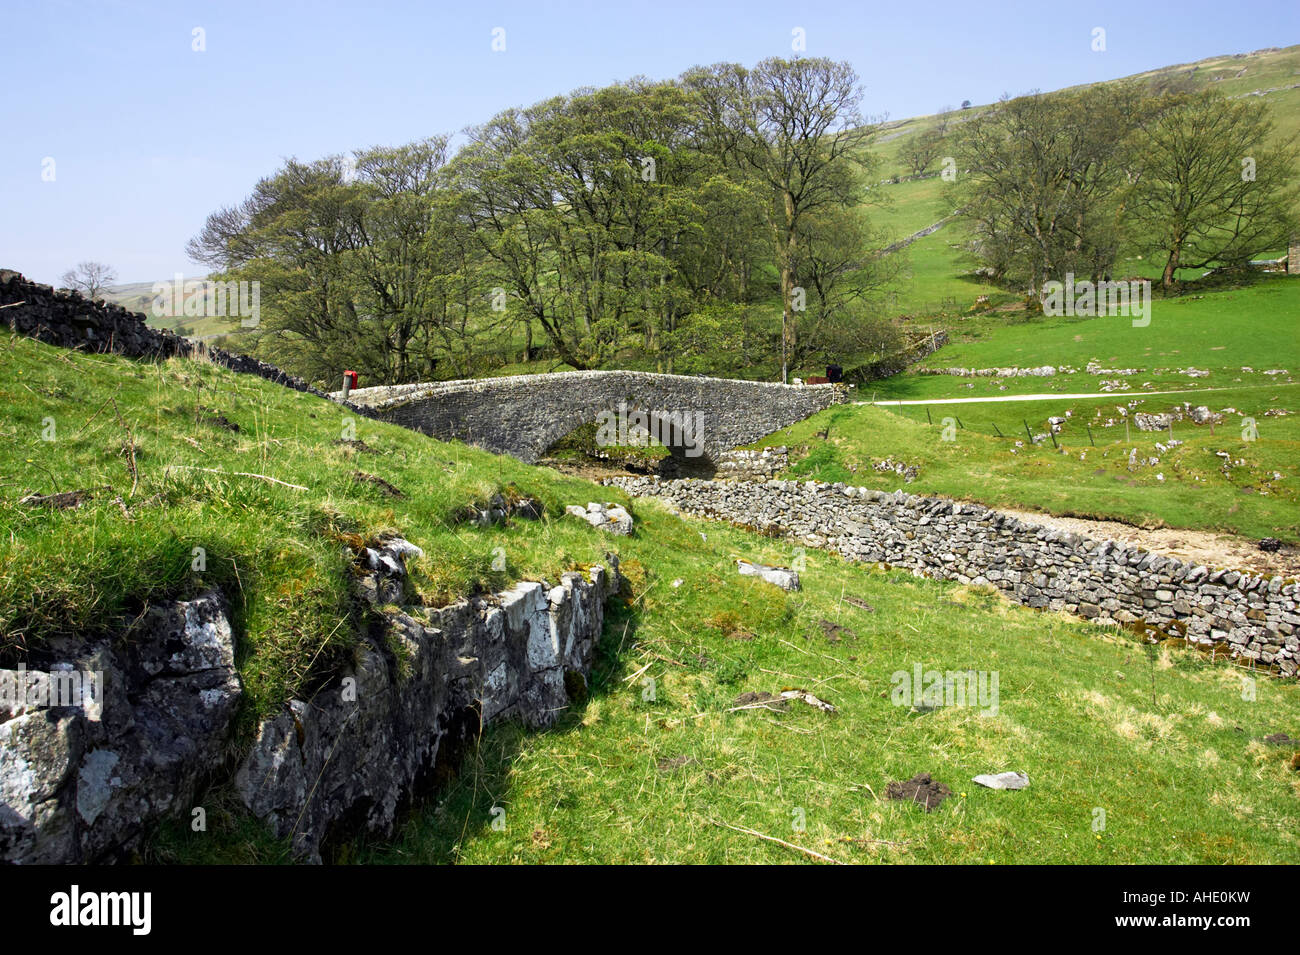 A bridge over the River Wharfe and a dry stone wall at Yockenthwaite in Wharfedale, Yorkshire Dales National Park, UK Stock Photo